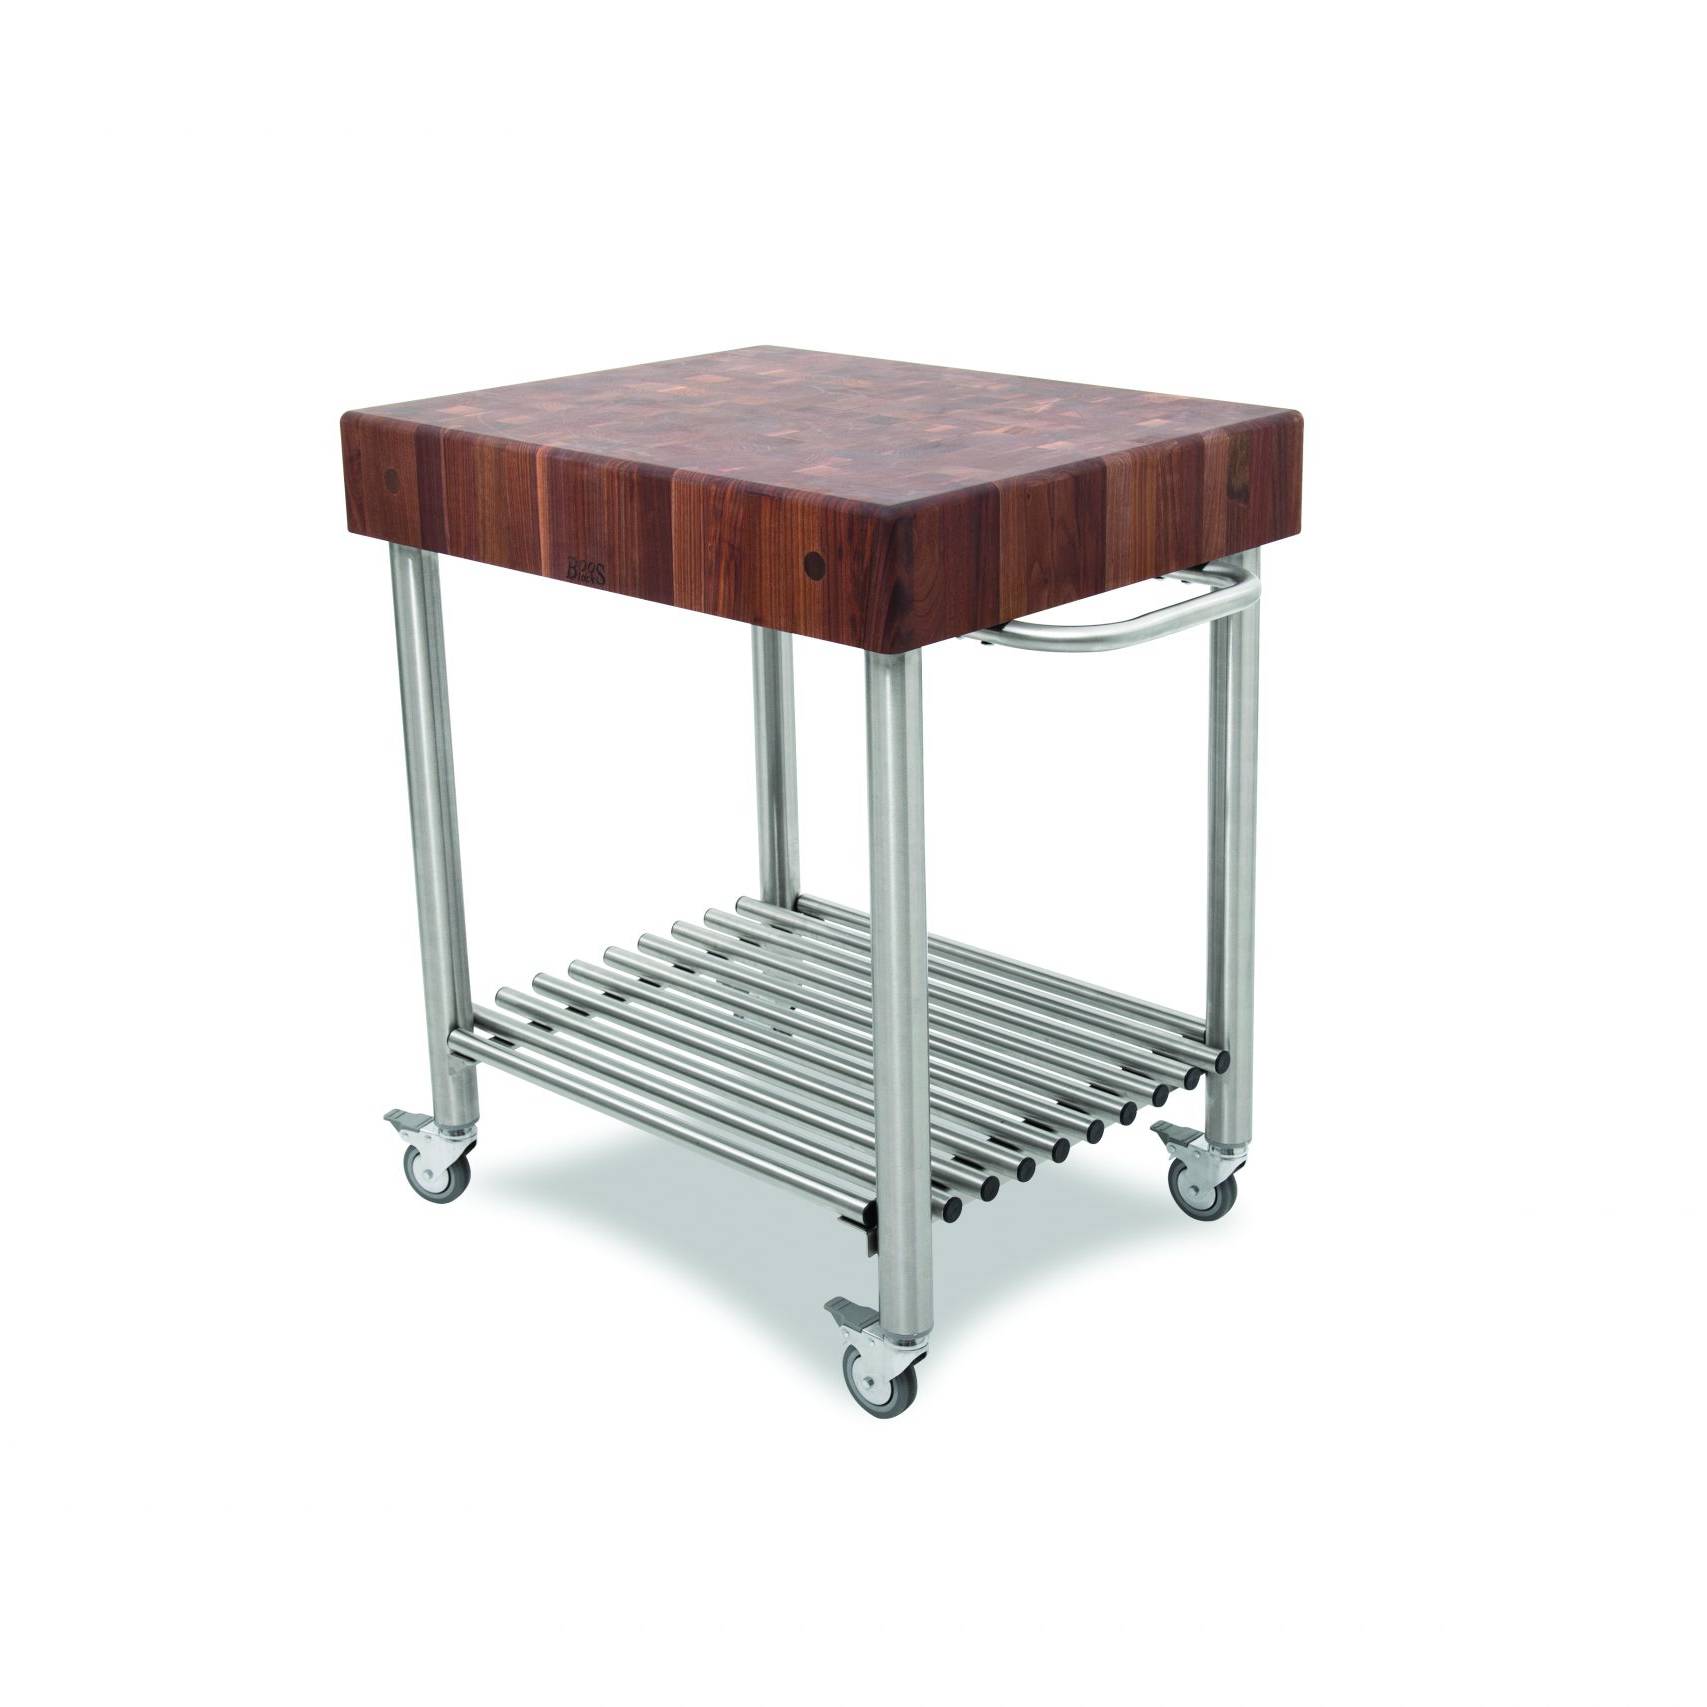 Cucina Kitchen &amp; Wine serving cart with Black Walnut end grain countertop and stainless steel base with one shelf, towel rack; lockable casters 15